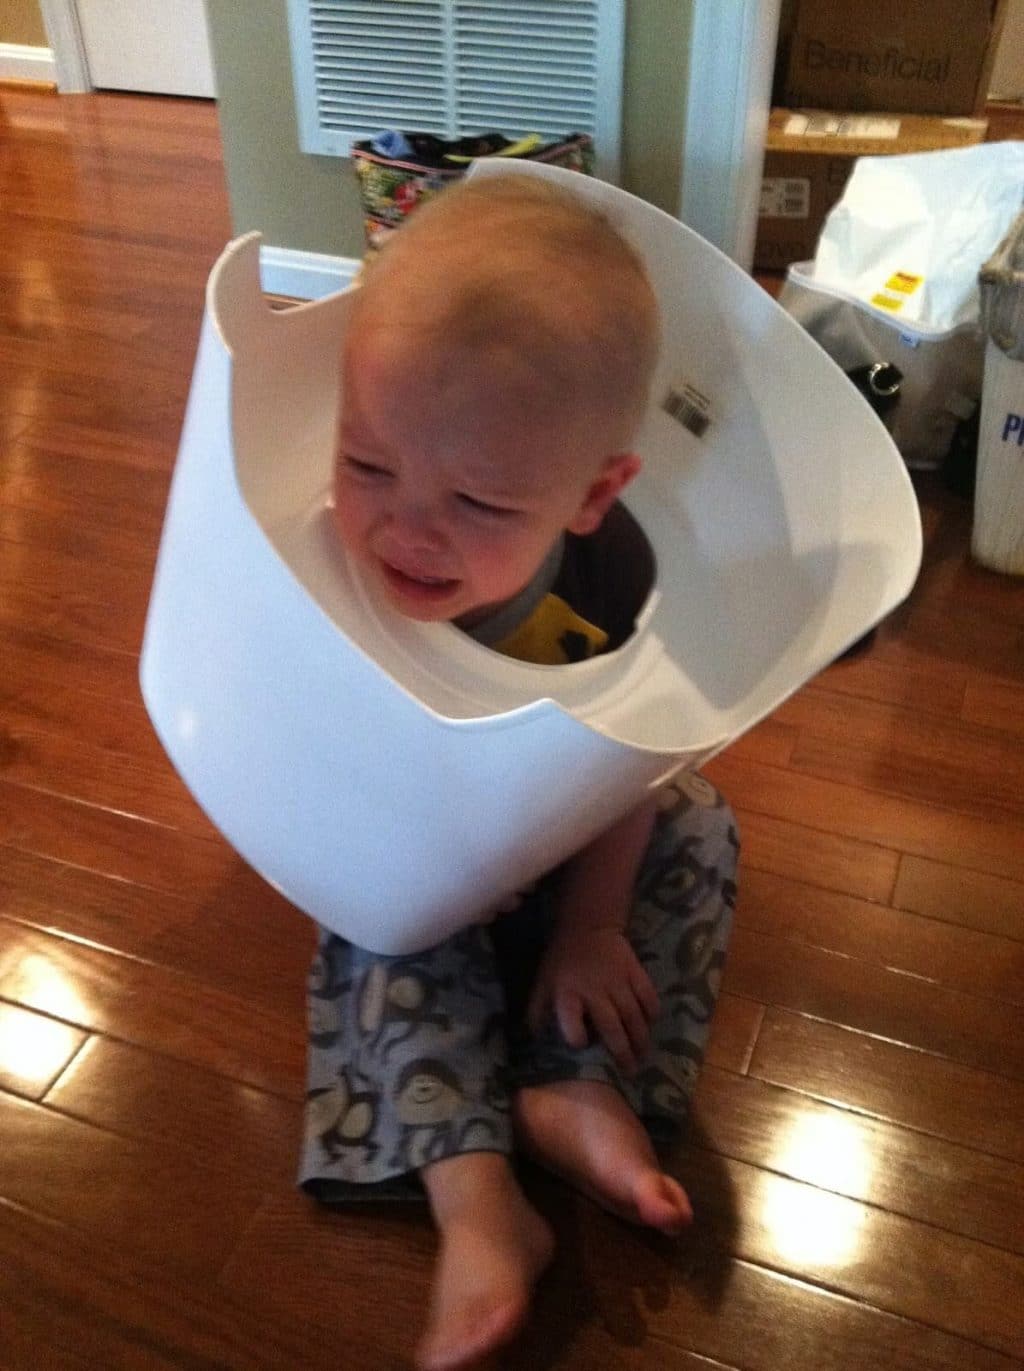 While the Mom cleans, the baby gets stuck in the toilet ...